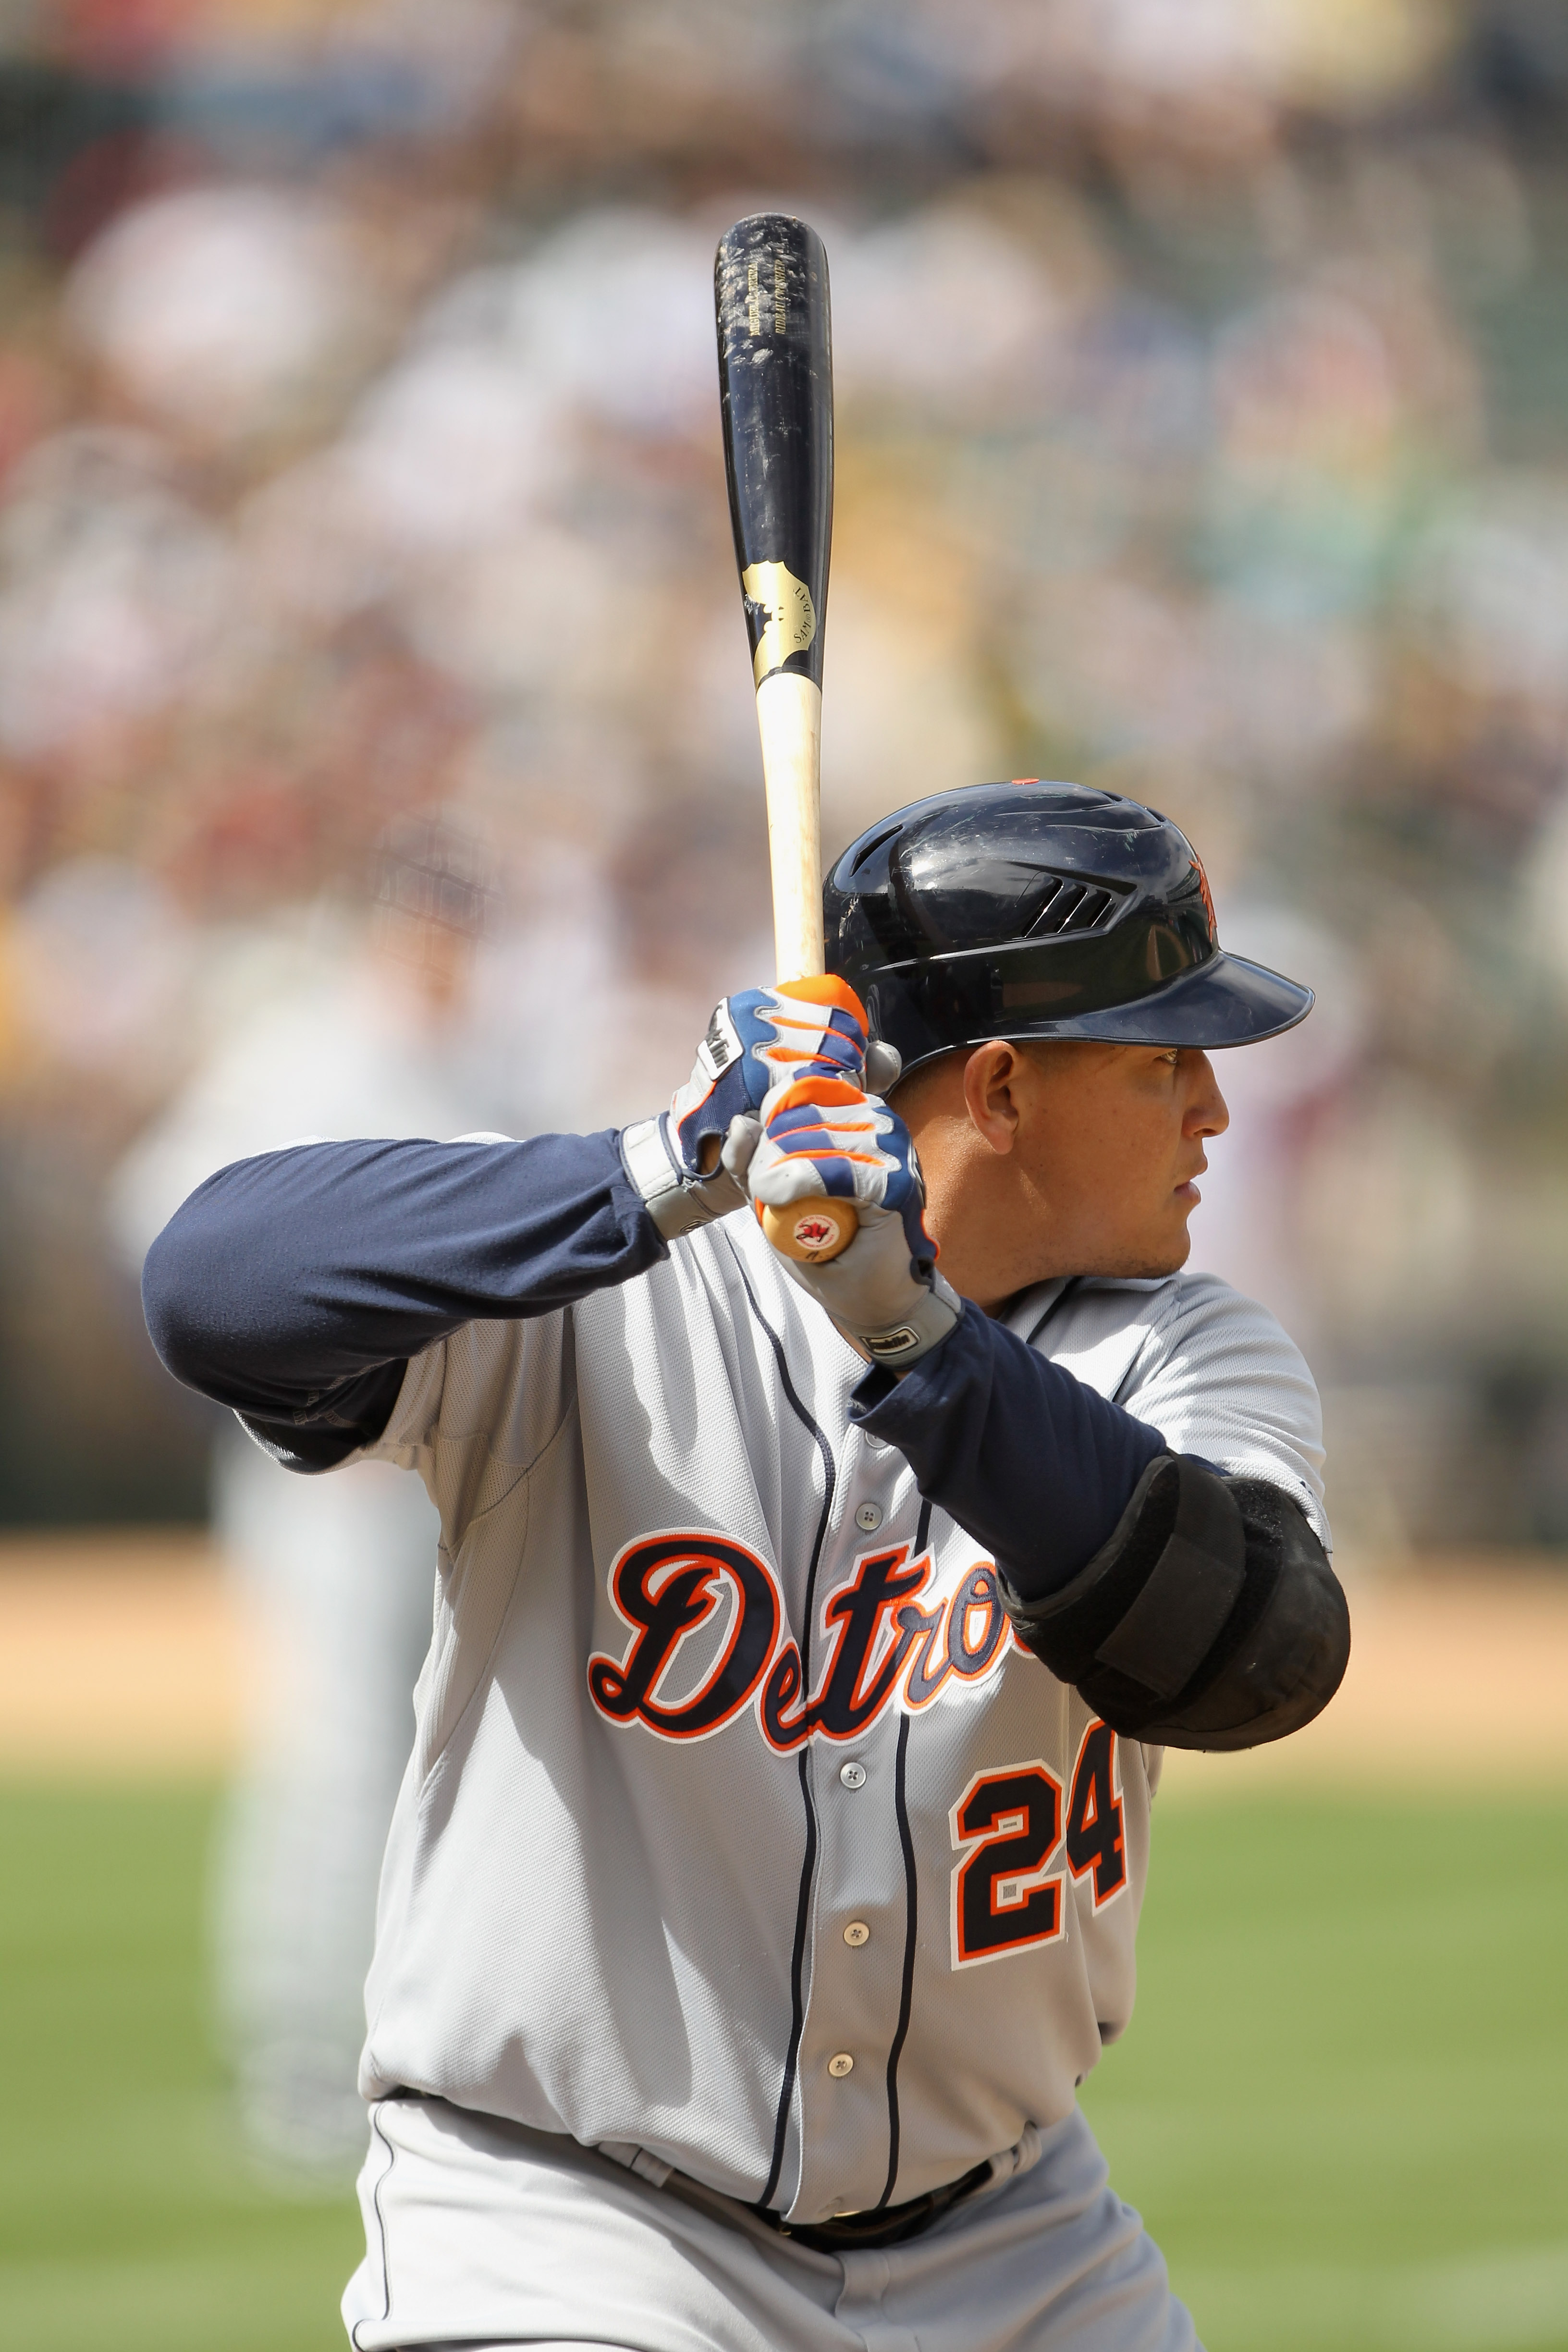 OAKLAND, CA - APRIL 17:  Miguel Cabrera #24 of the Detroit Tigers in action during their game against the Oakland Athletics at Oakland-Alameda County Coliseum on April 17, 2011 in Oakland, California.  (Photo by Ezra Shaw/Getty Images)